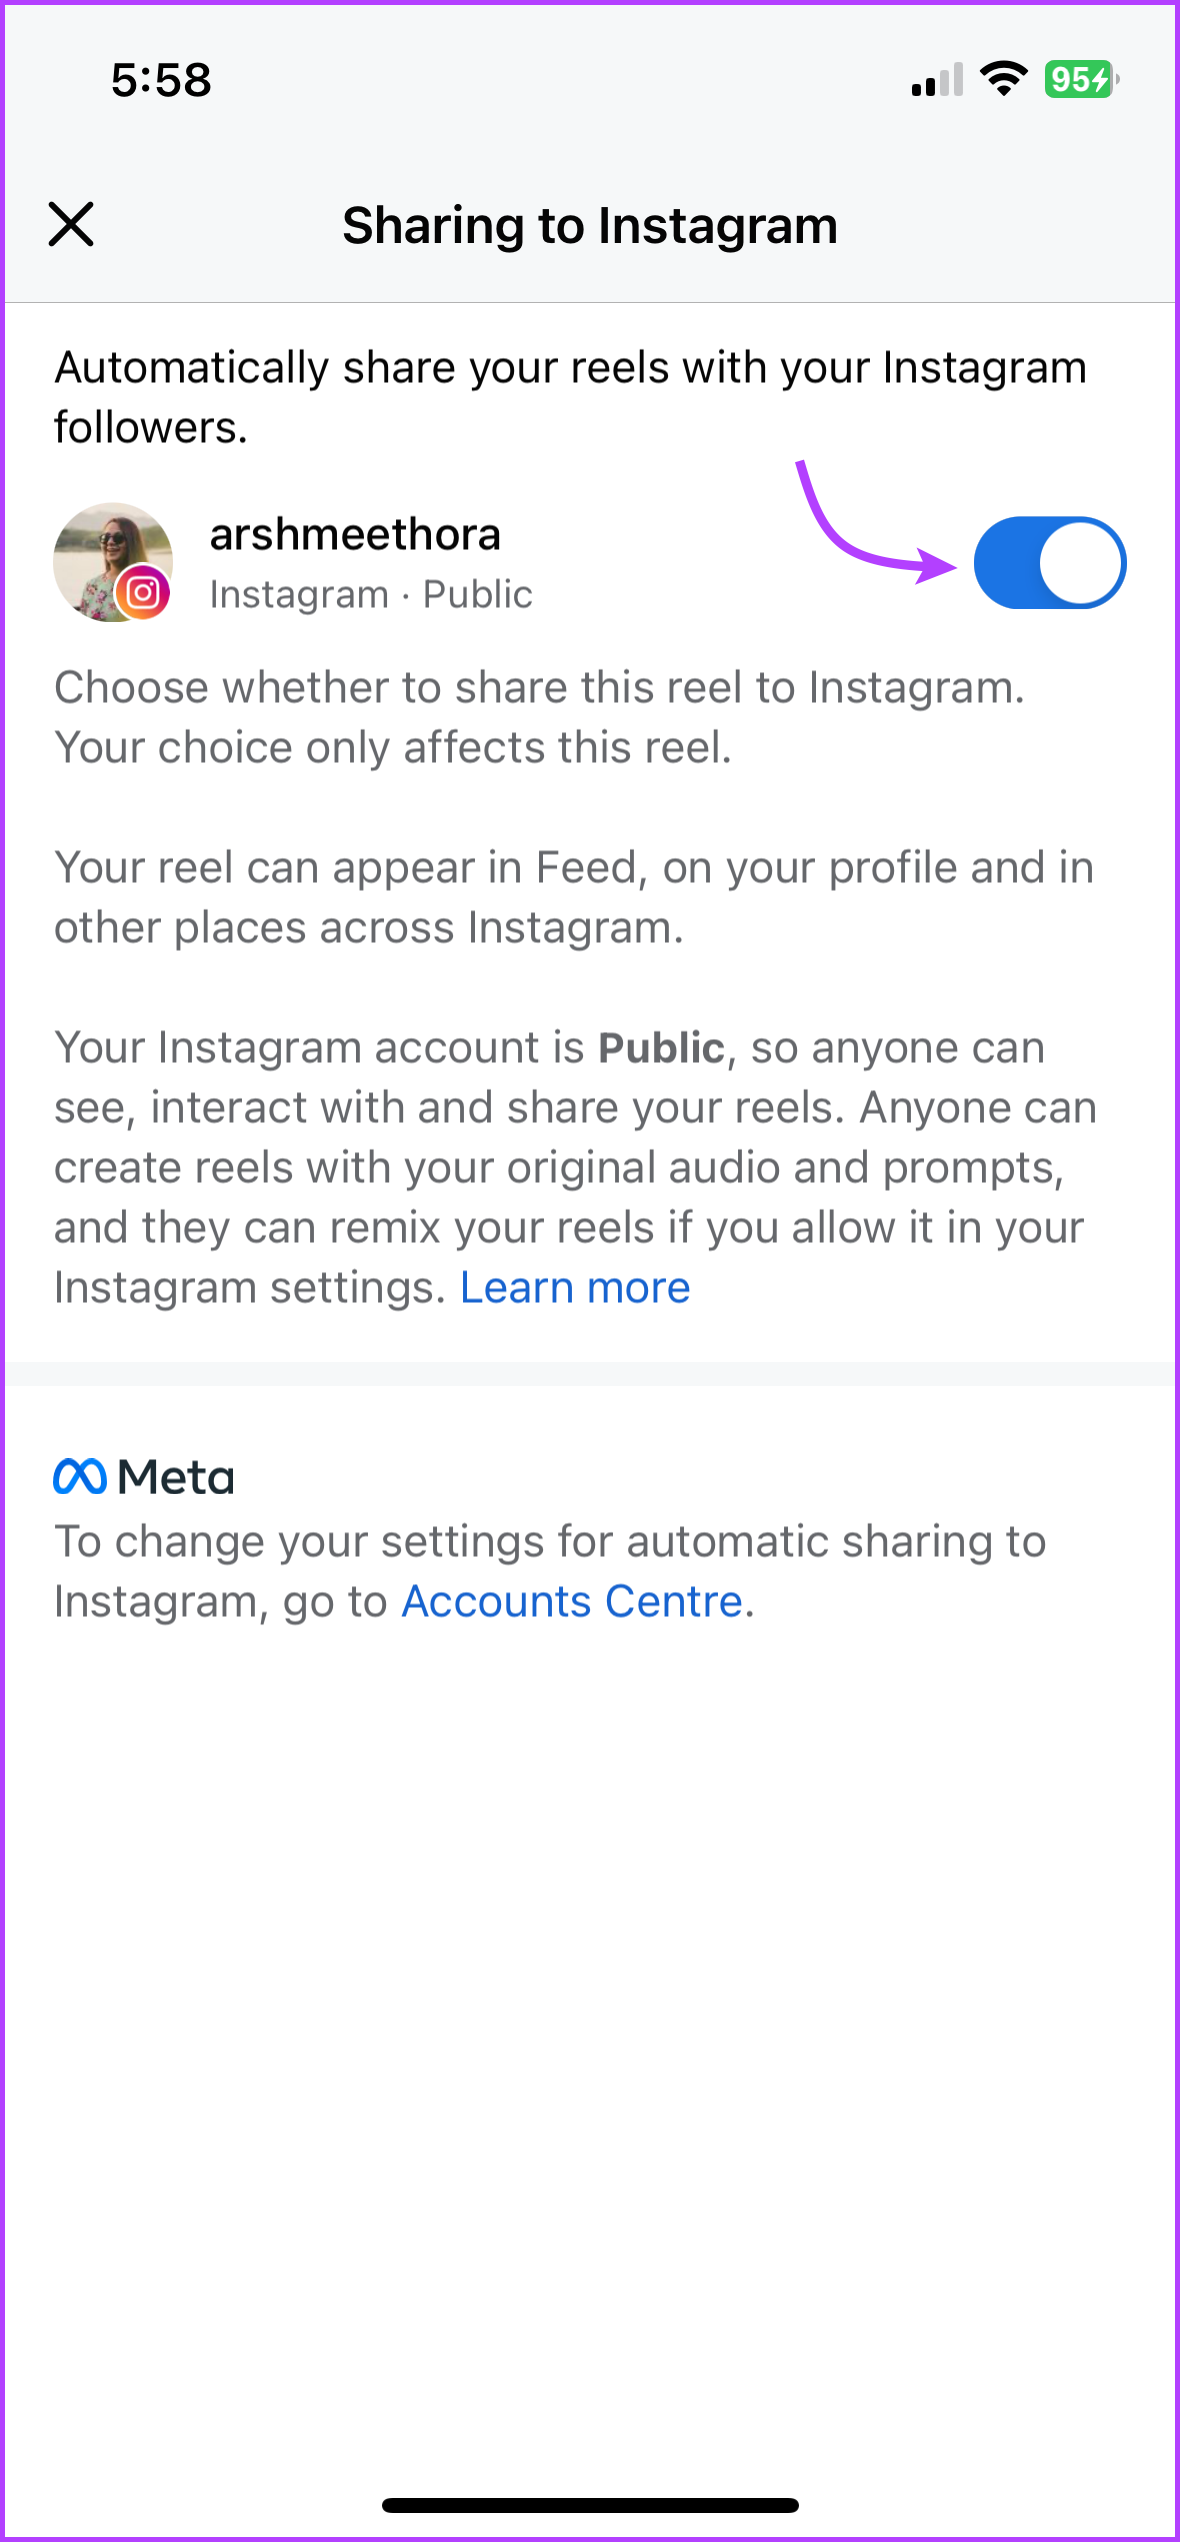 Toggle on to share the Facebook reel to Instagram 